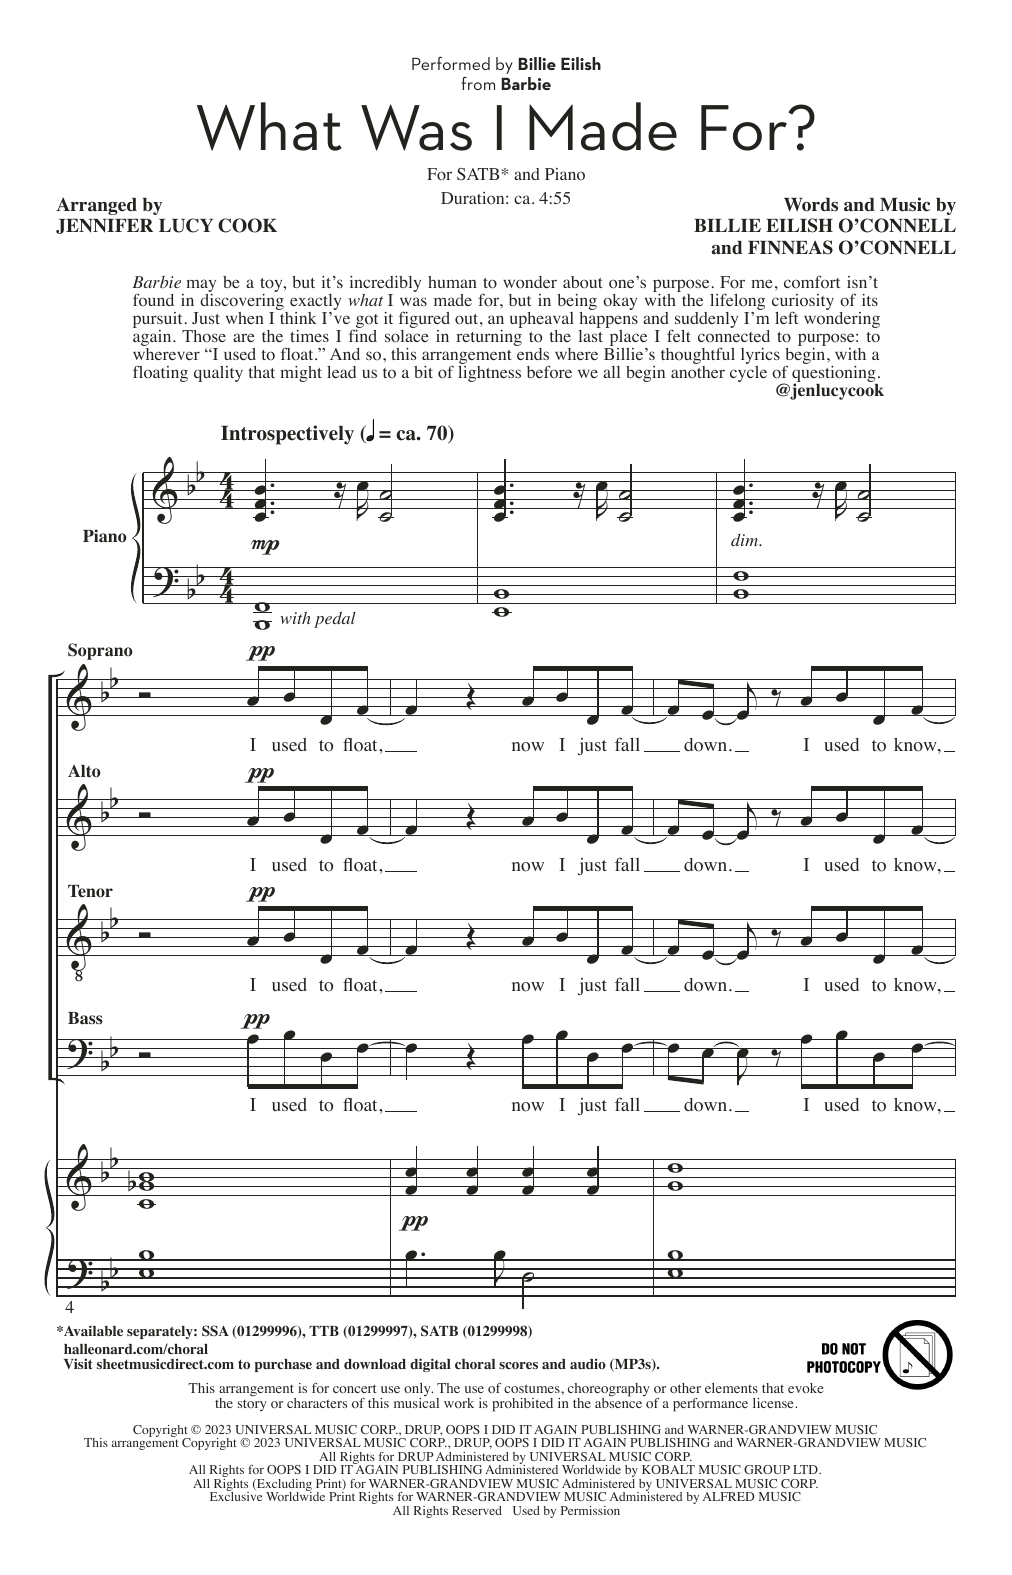 Billie Eilish What Was I Made For? (from Barbie) (arr. Jennifer Lucy Cook) sheet music notes printable PDF score